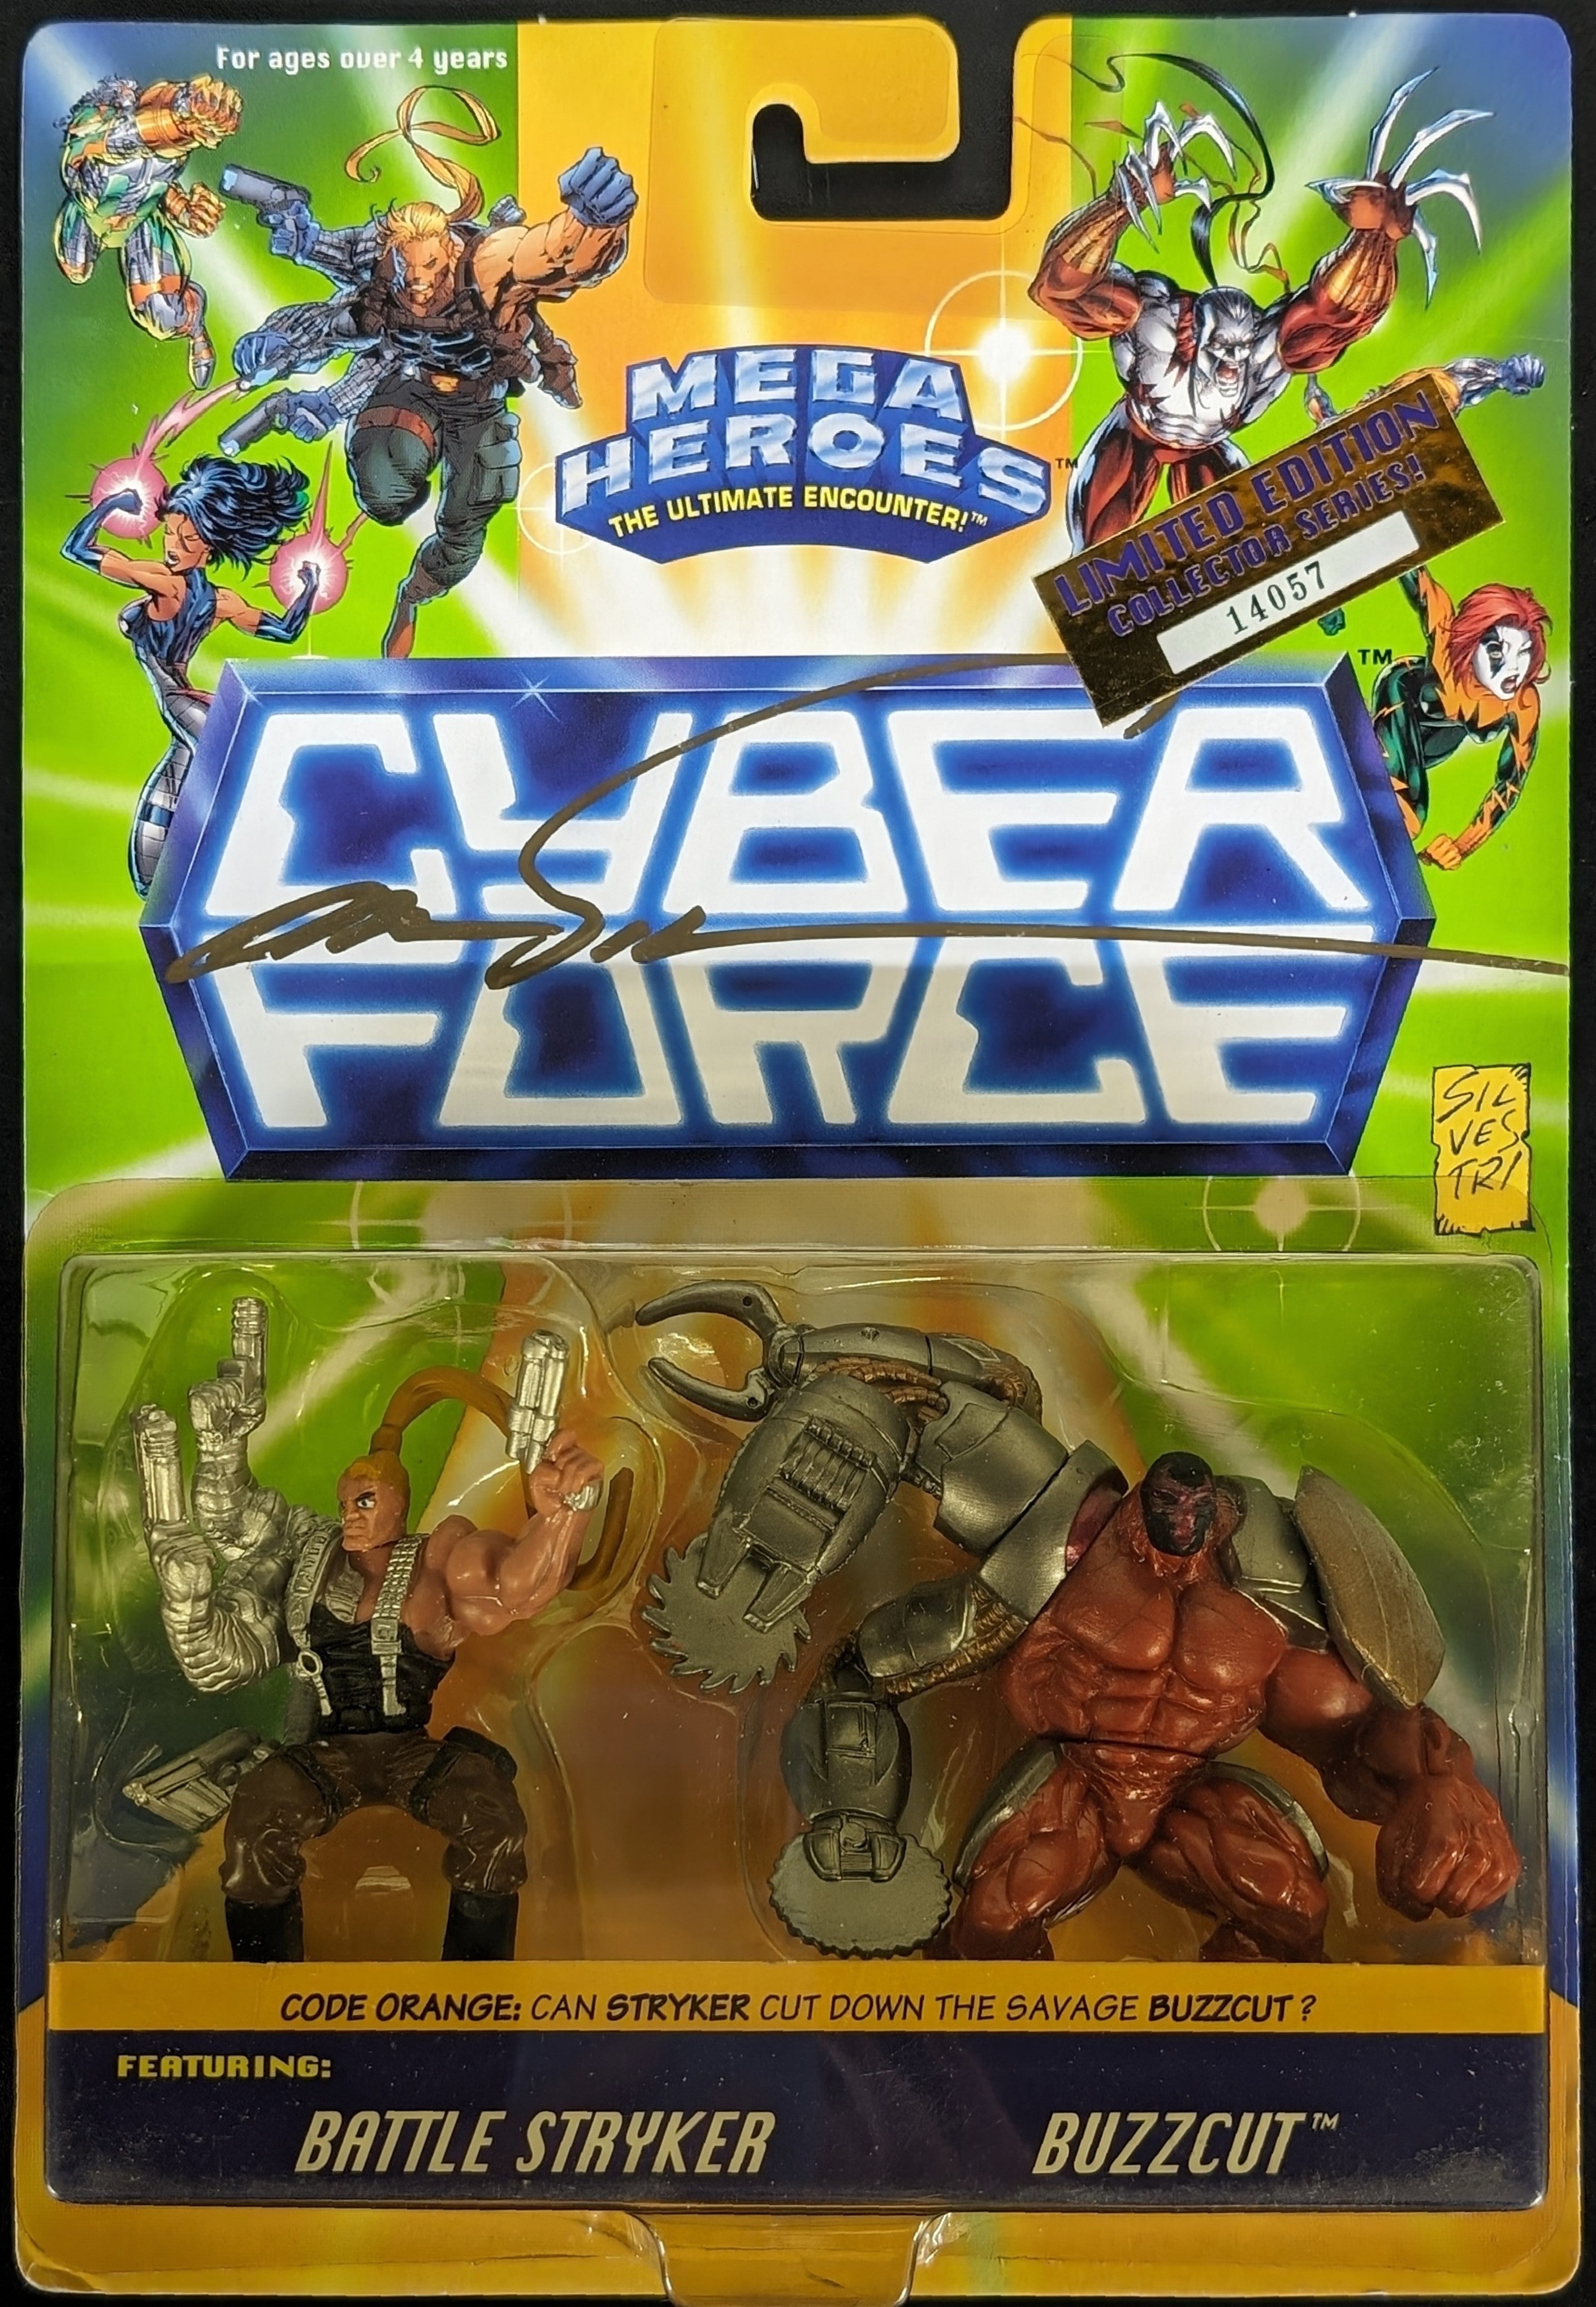 1995 Mattel Mega Heroes Cyber Force Battle Stryker and Buzzcut Action Figure Signed by Marc Silvestri